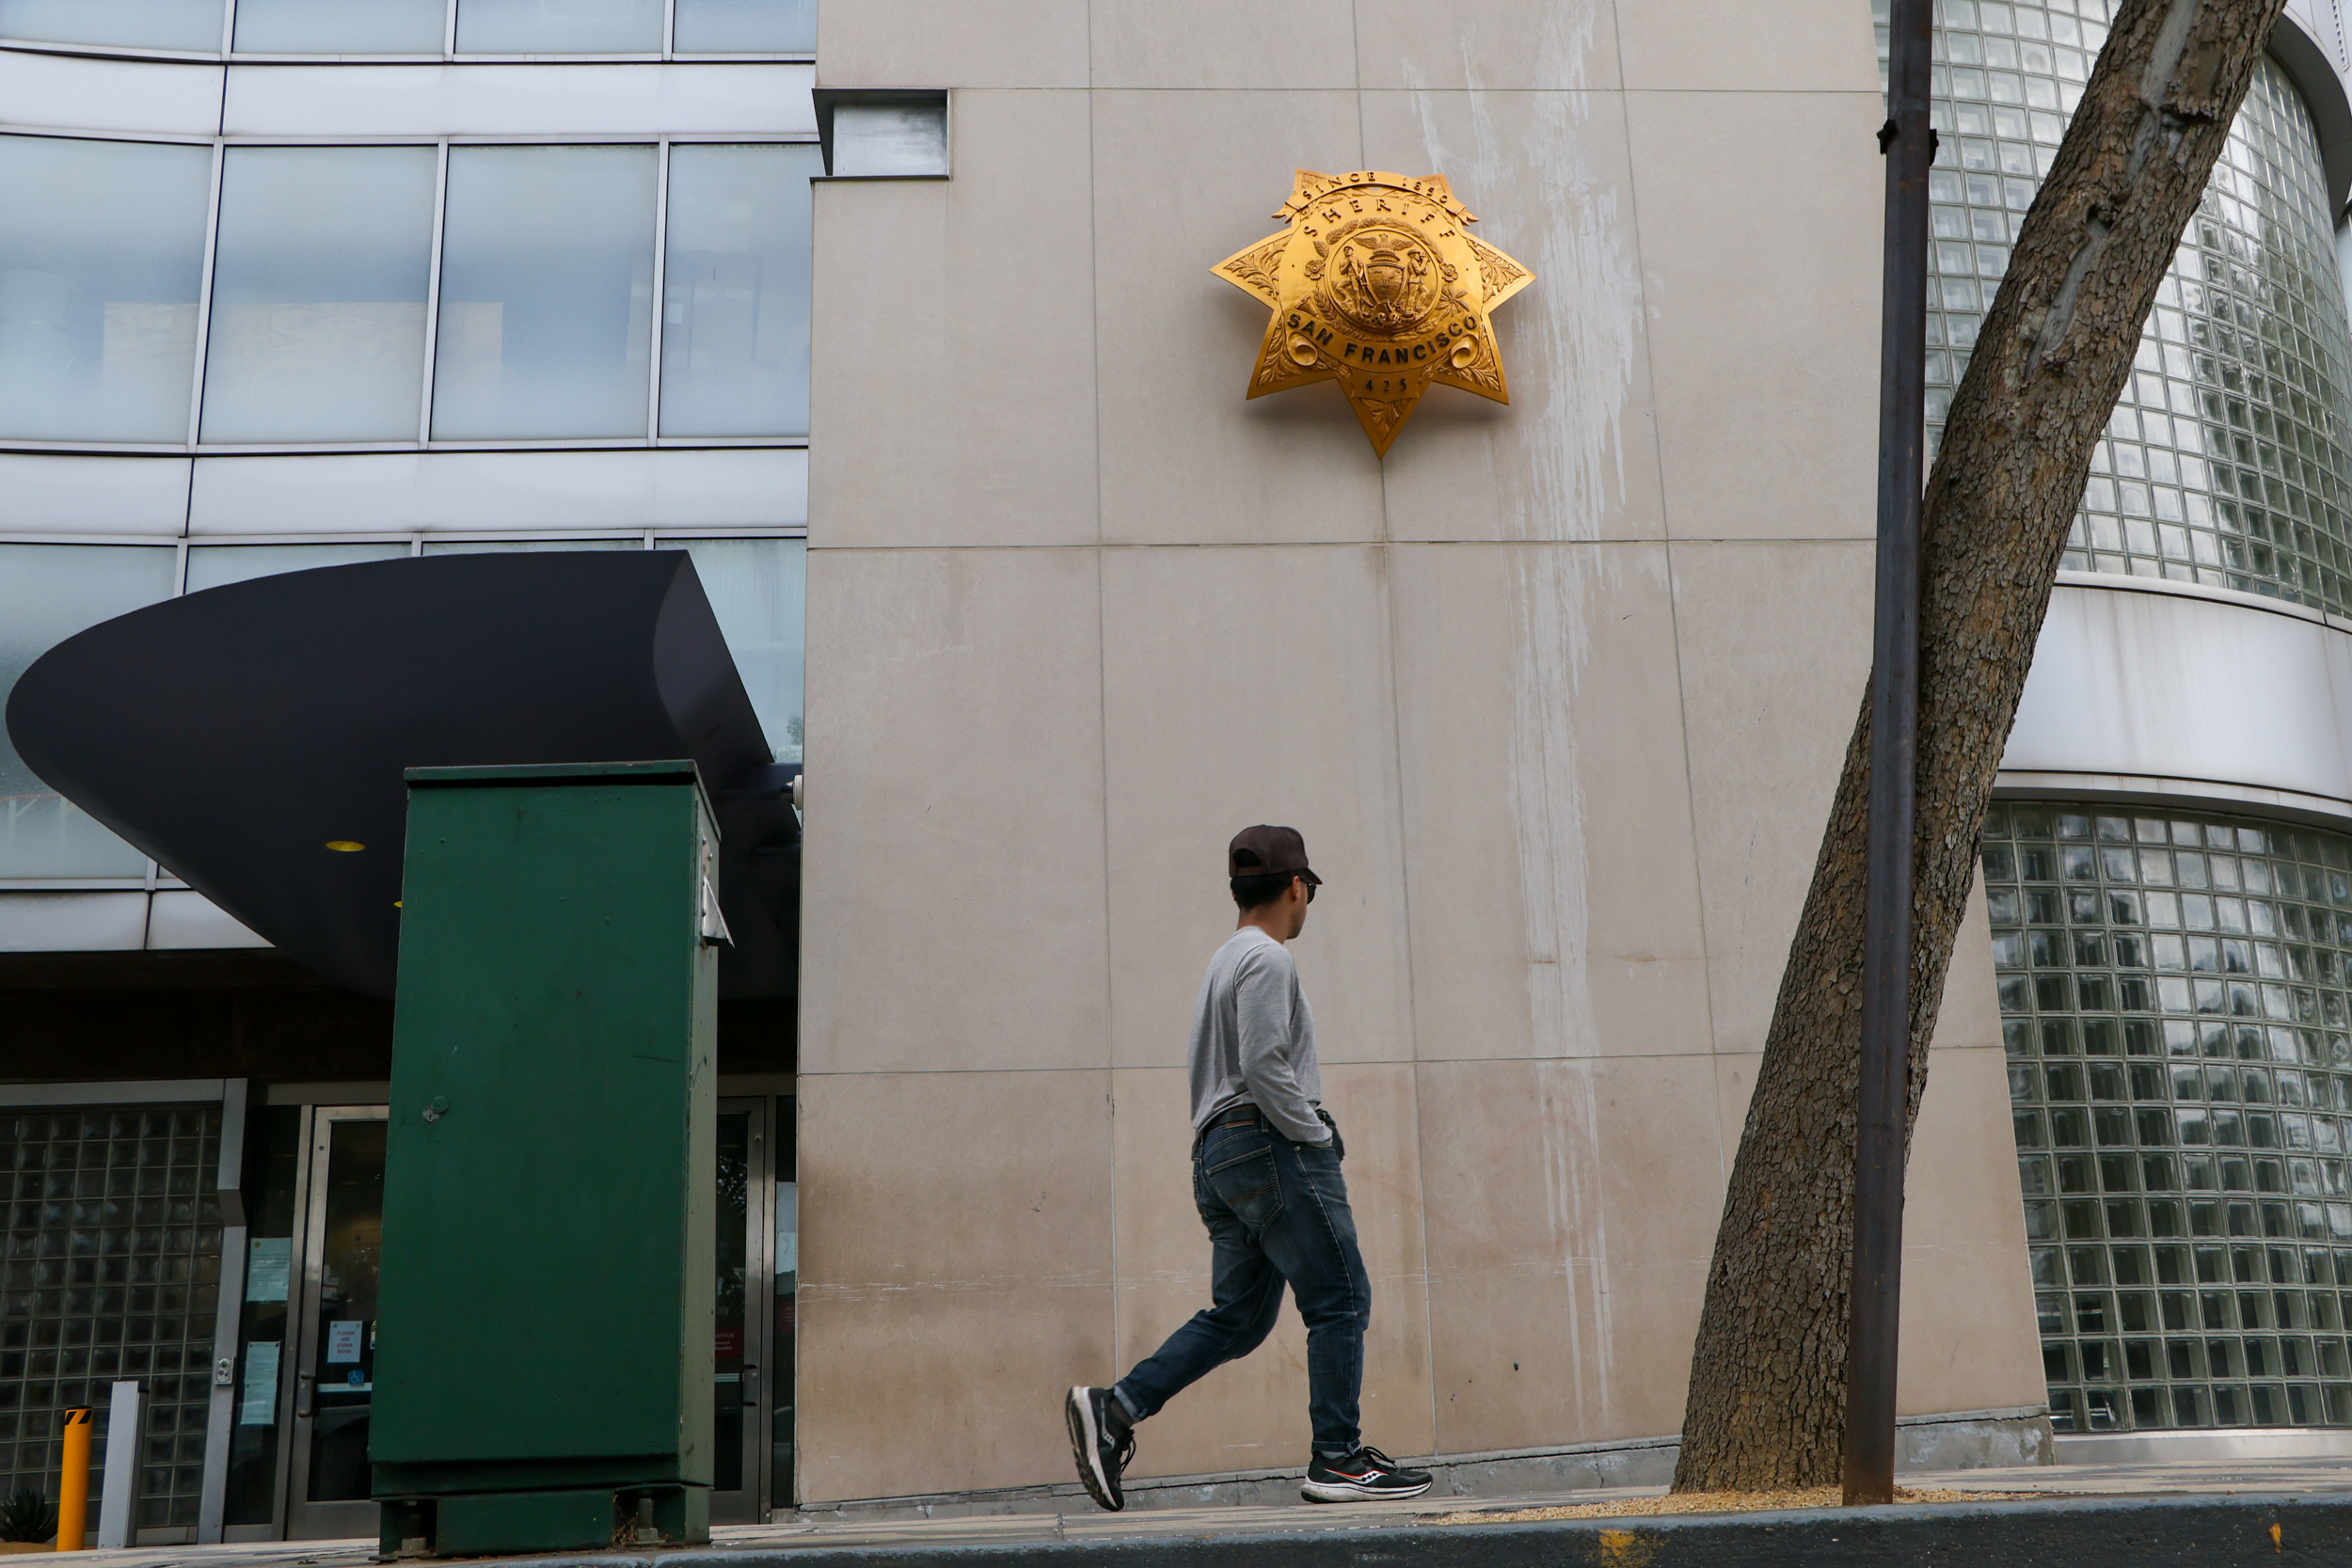 A person walks by a beige colored building with a law enforcement star affixed on the facade